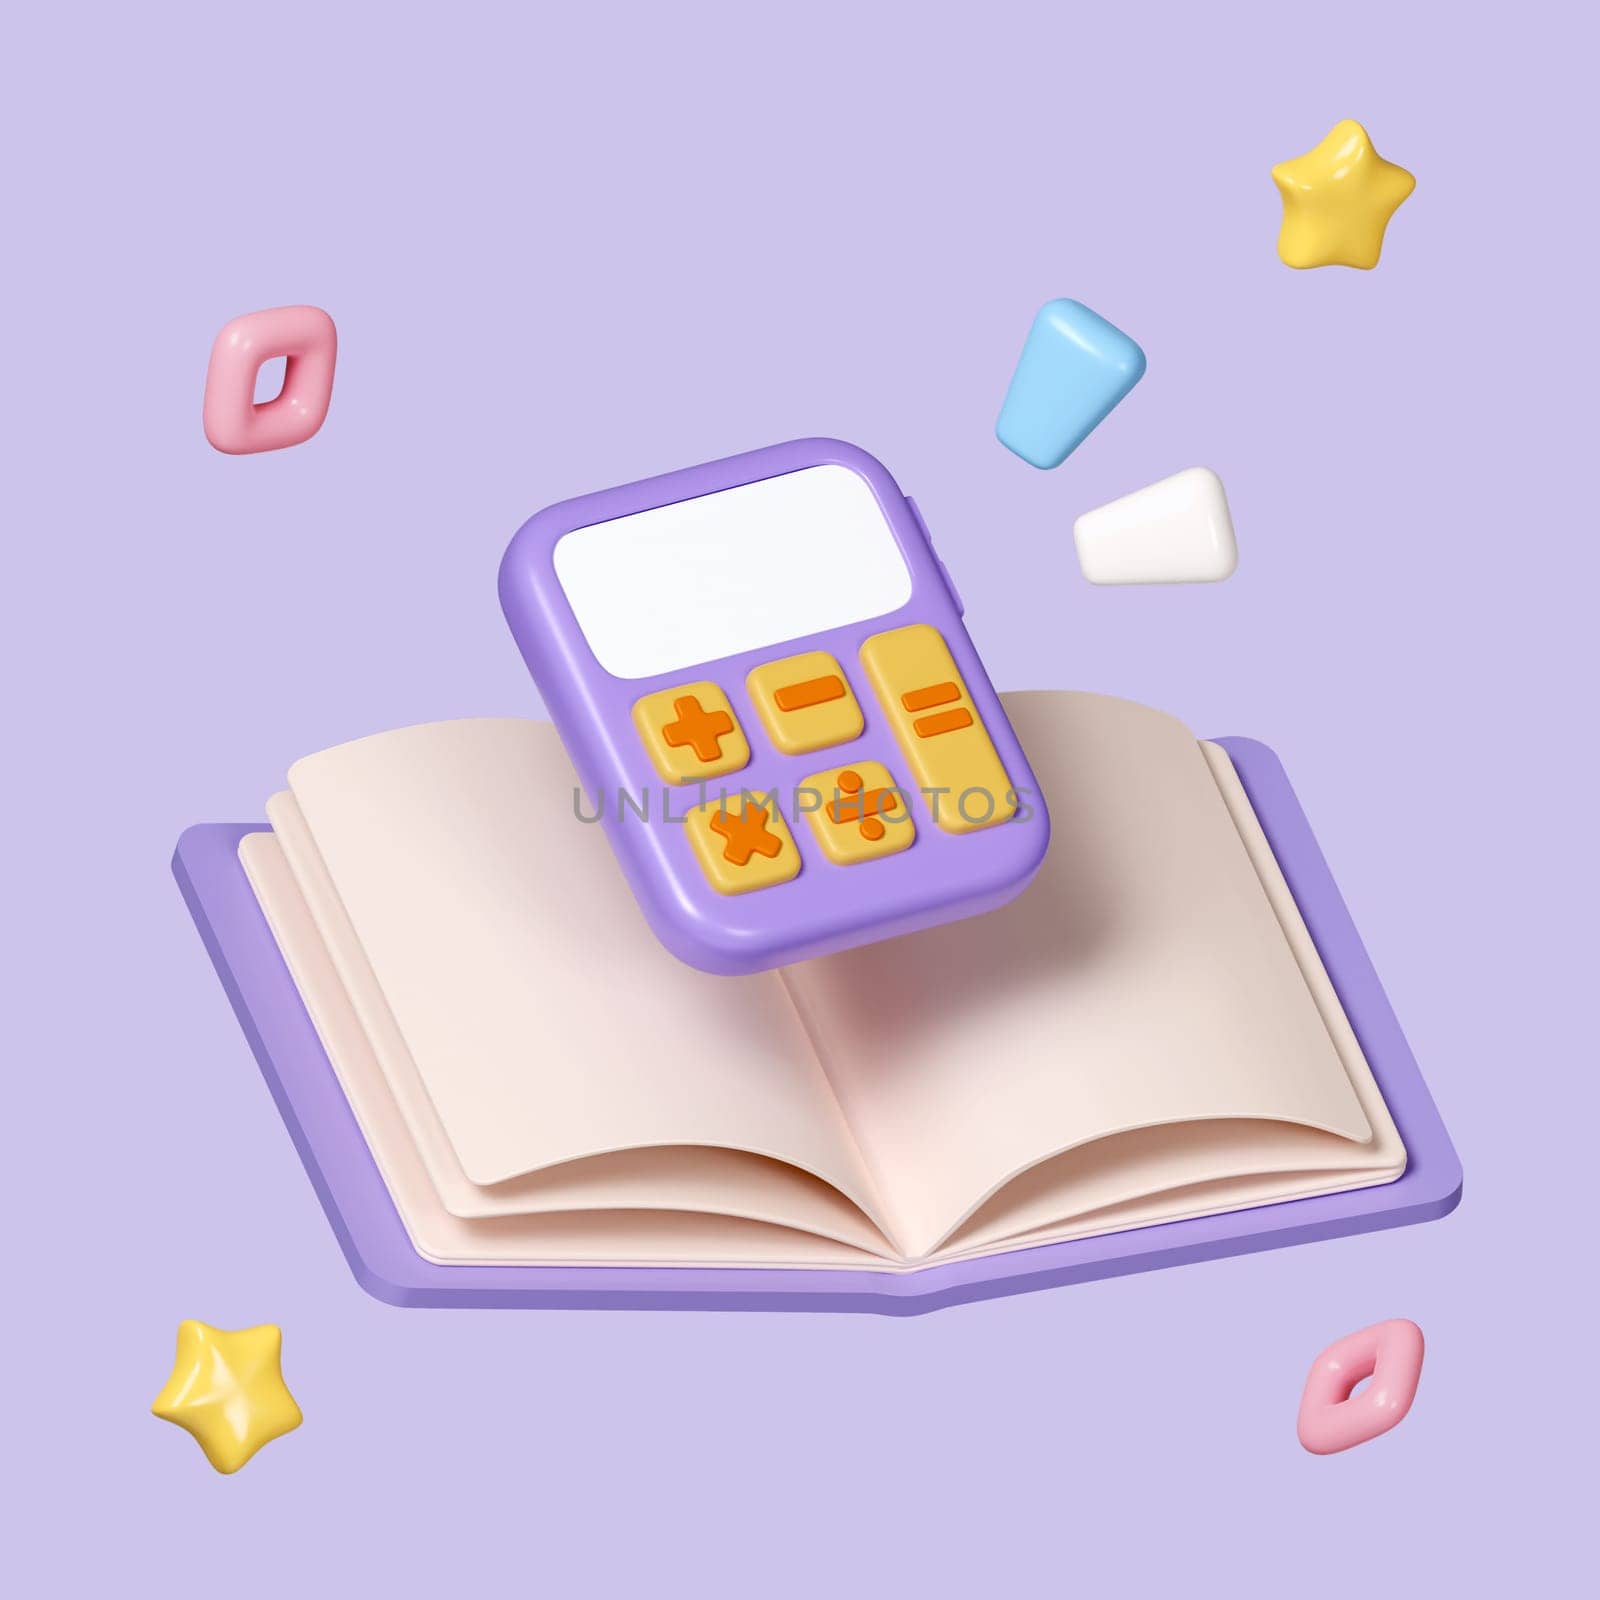 Calculator, math device. Financial analytics, bookkeeping, budget, debit, credit calculations concept. icon symbol clipping path. 3d render illustration by meepiangraphic